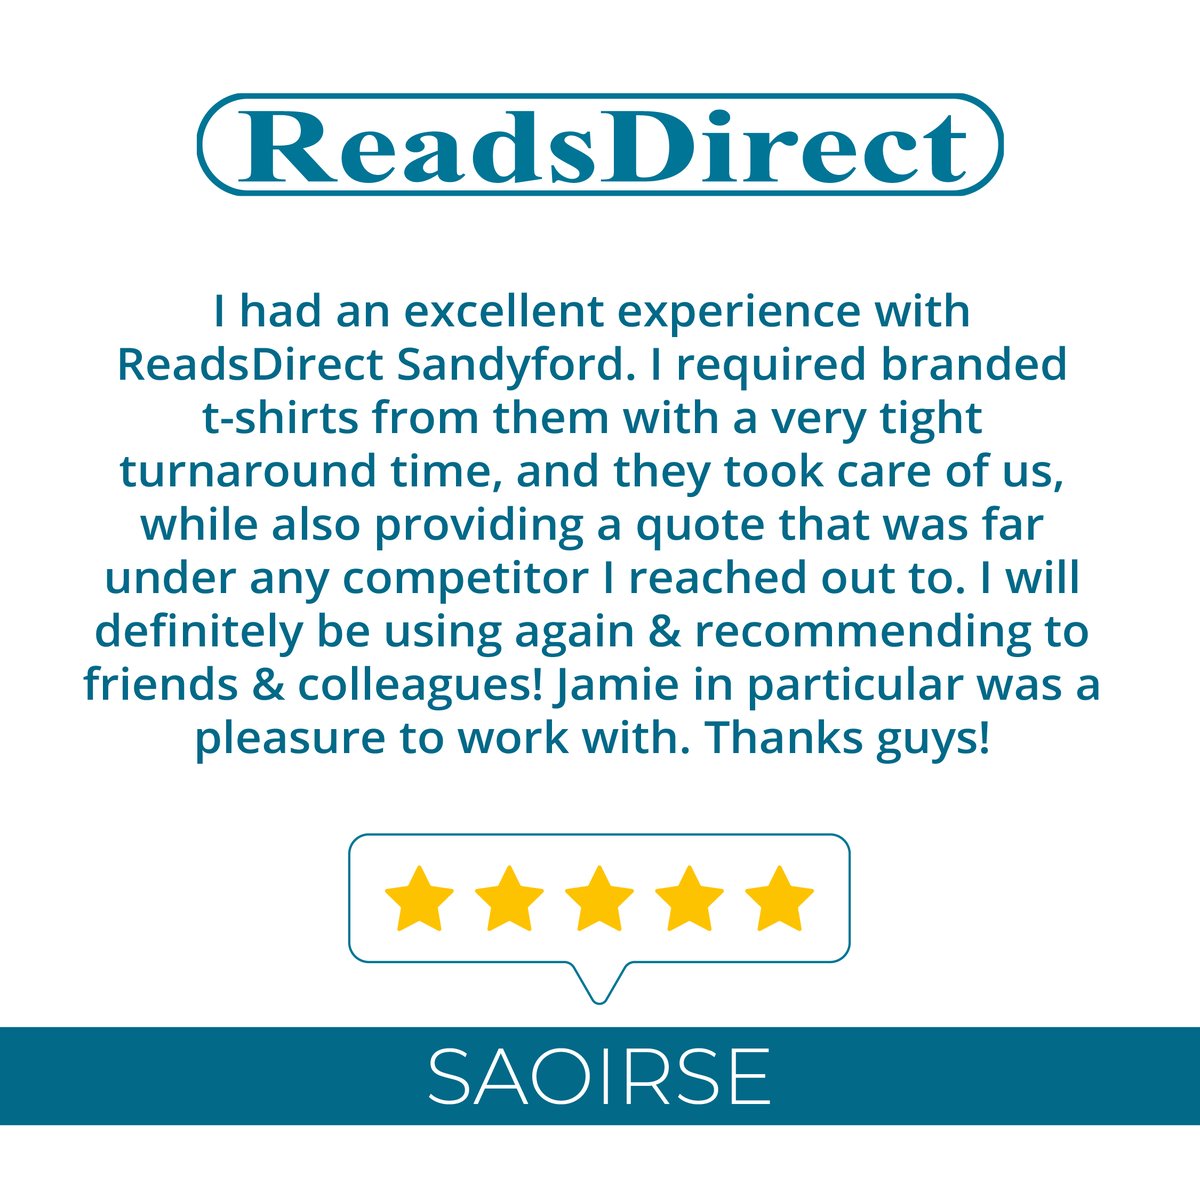 Our team works hard every day to provide the best printing service and it's so rewarding to see it pay off! 

 #reviews #customerreview #review #fivestarreview #customersatisfaction #happycustomer #fivestars #customerservice #printingservices #printing #ireland #readsdirect